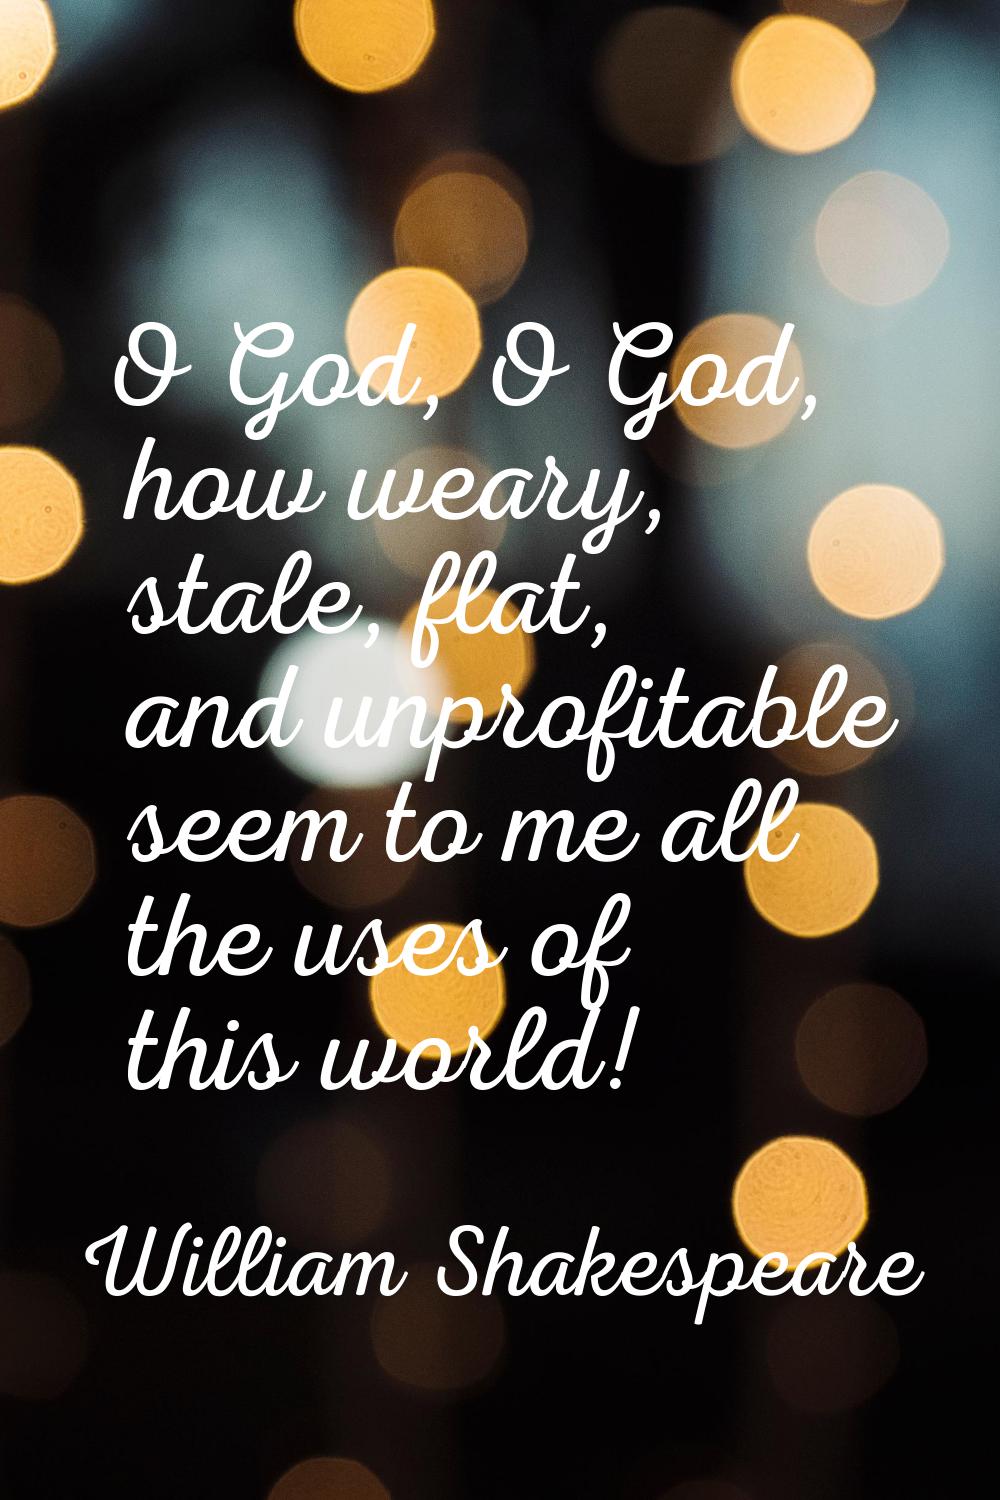 O God, O God, how weary, stale, flat, and unprofitable seem to me all the uses of this world!